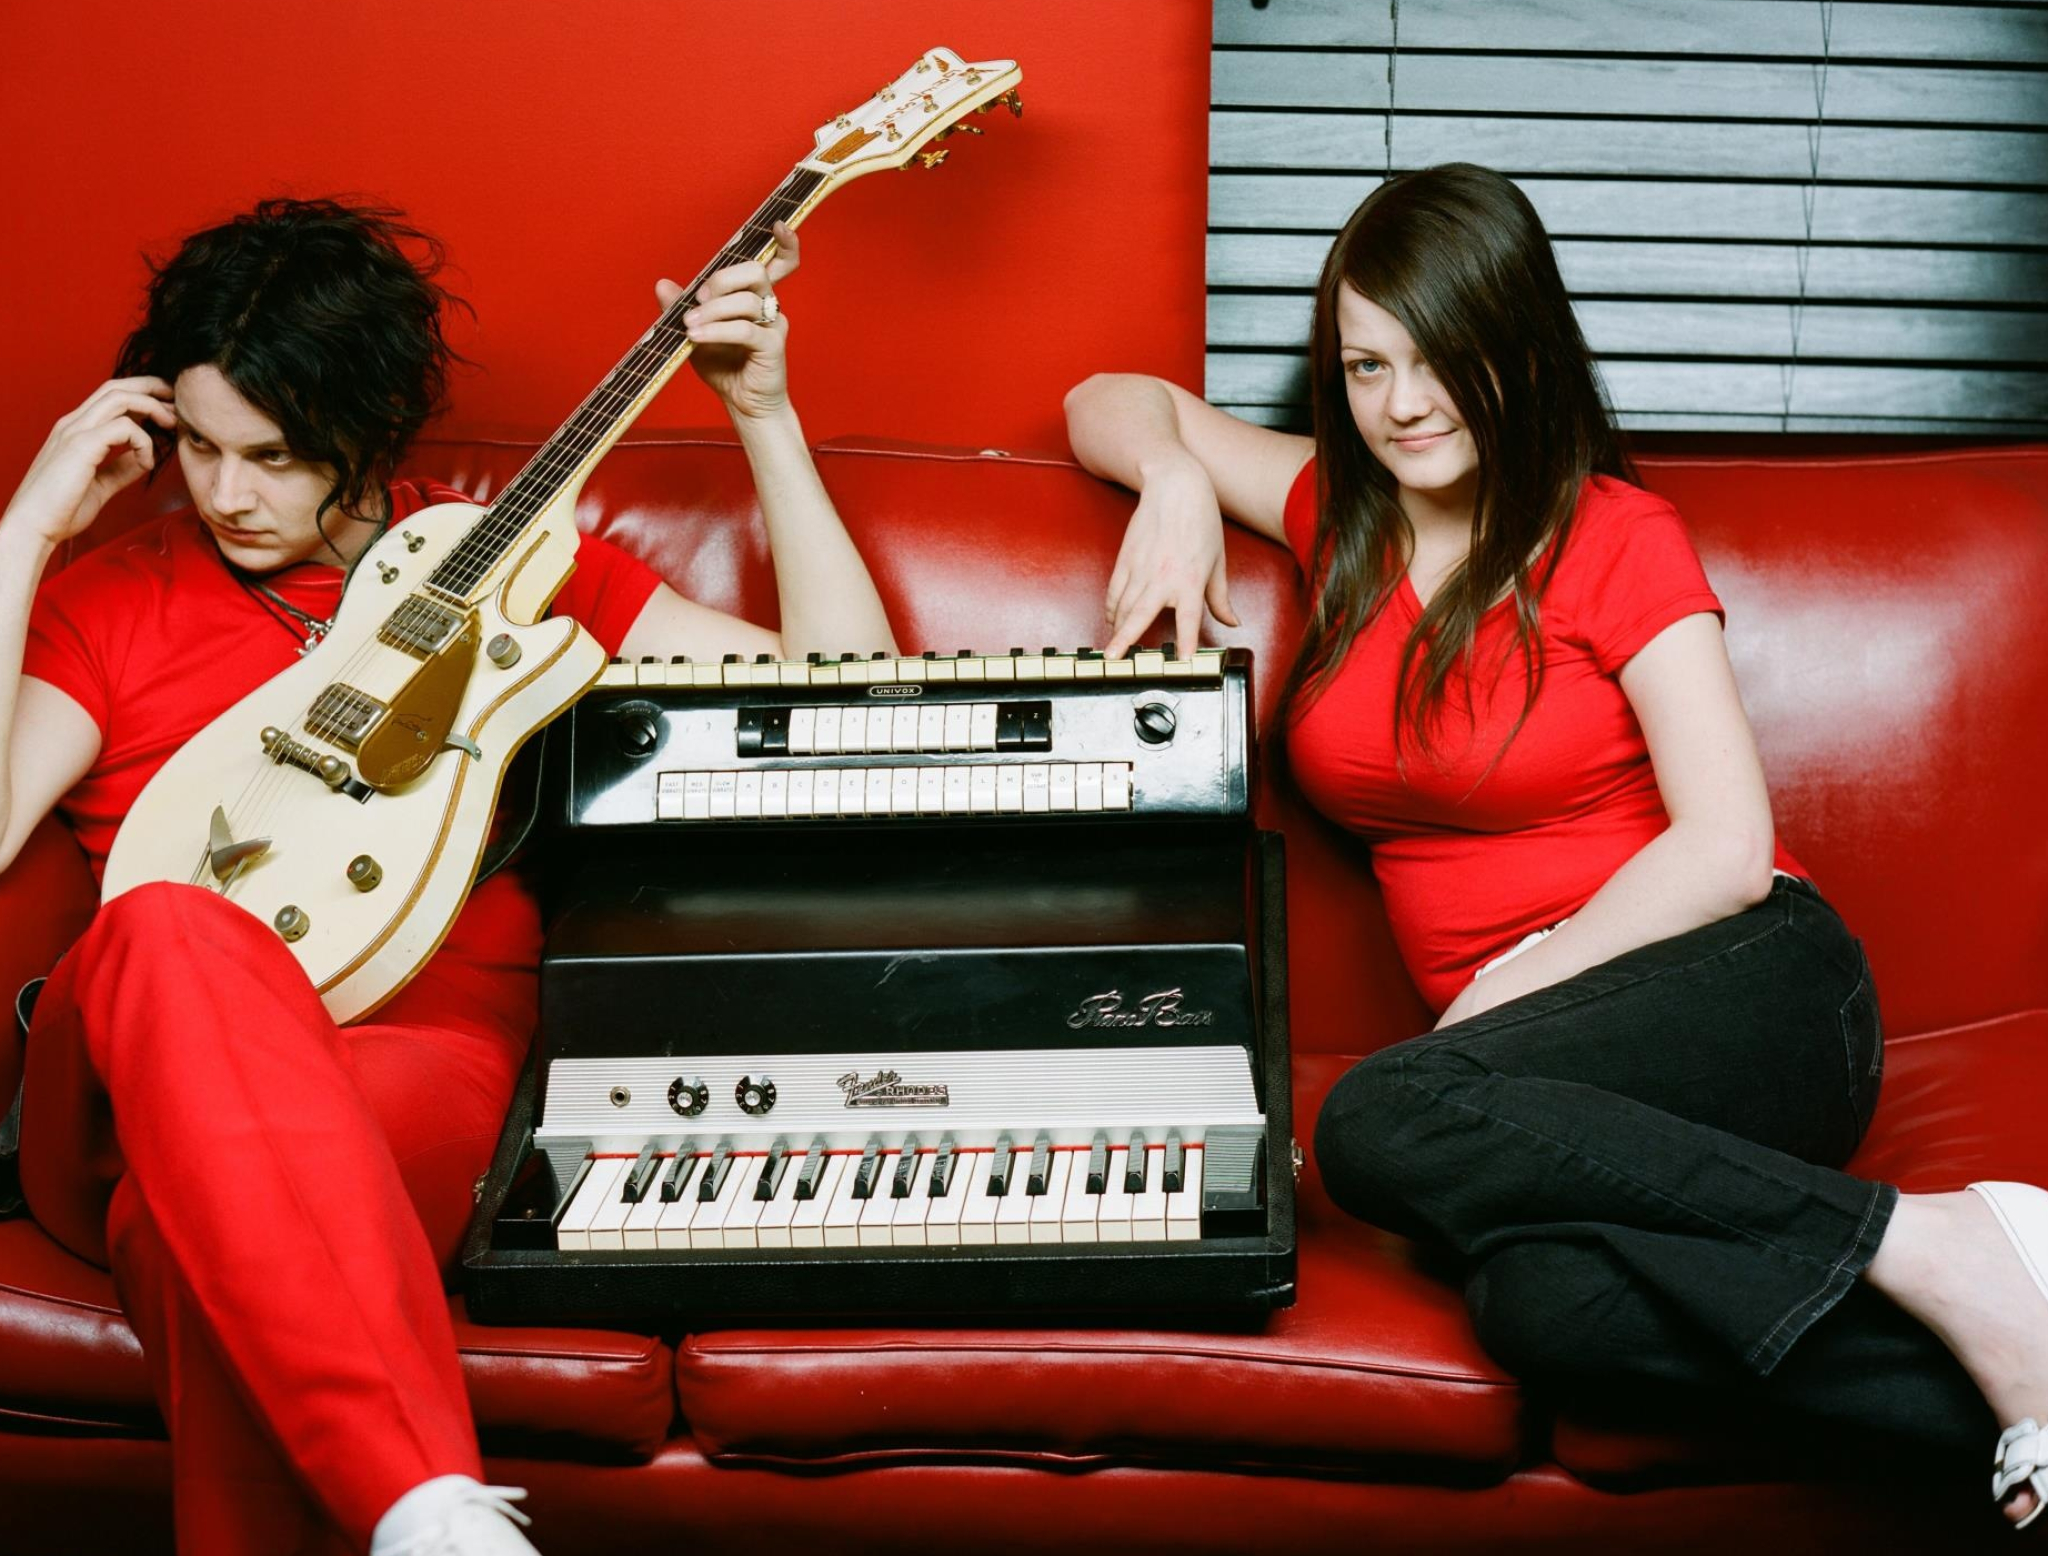 HD wallpaper, Greatest Hits, The White Stripes, 2050X1560 Hd Desktop, Desktop Hd The White Stripes Band Wallpaper Image, Album Review